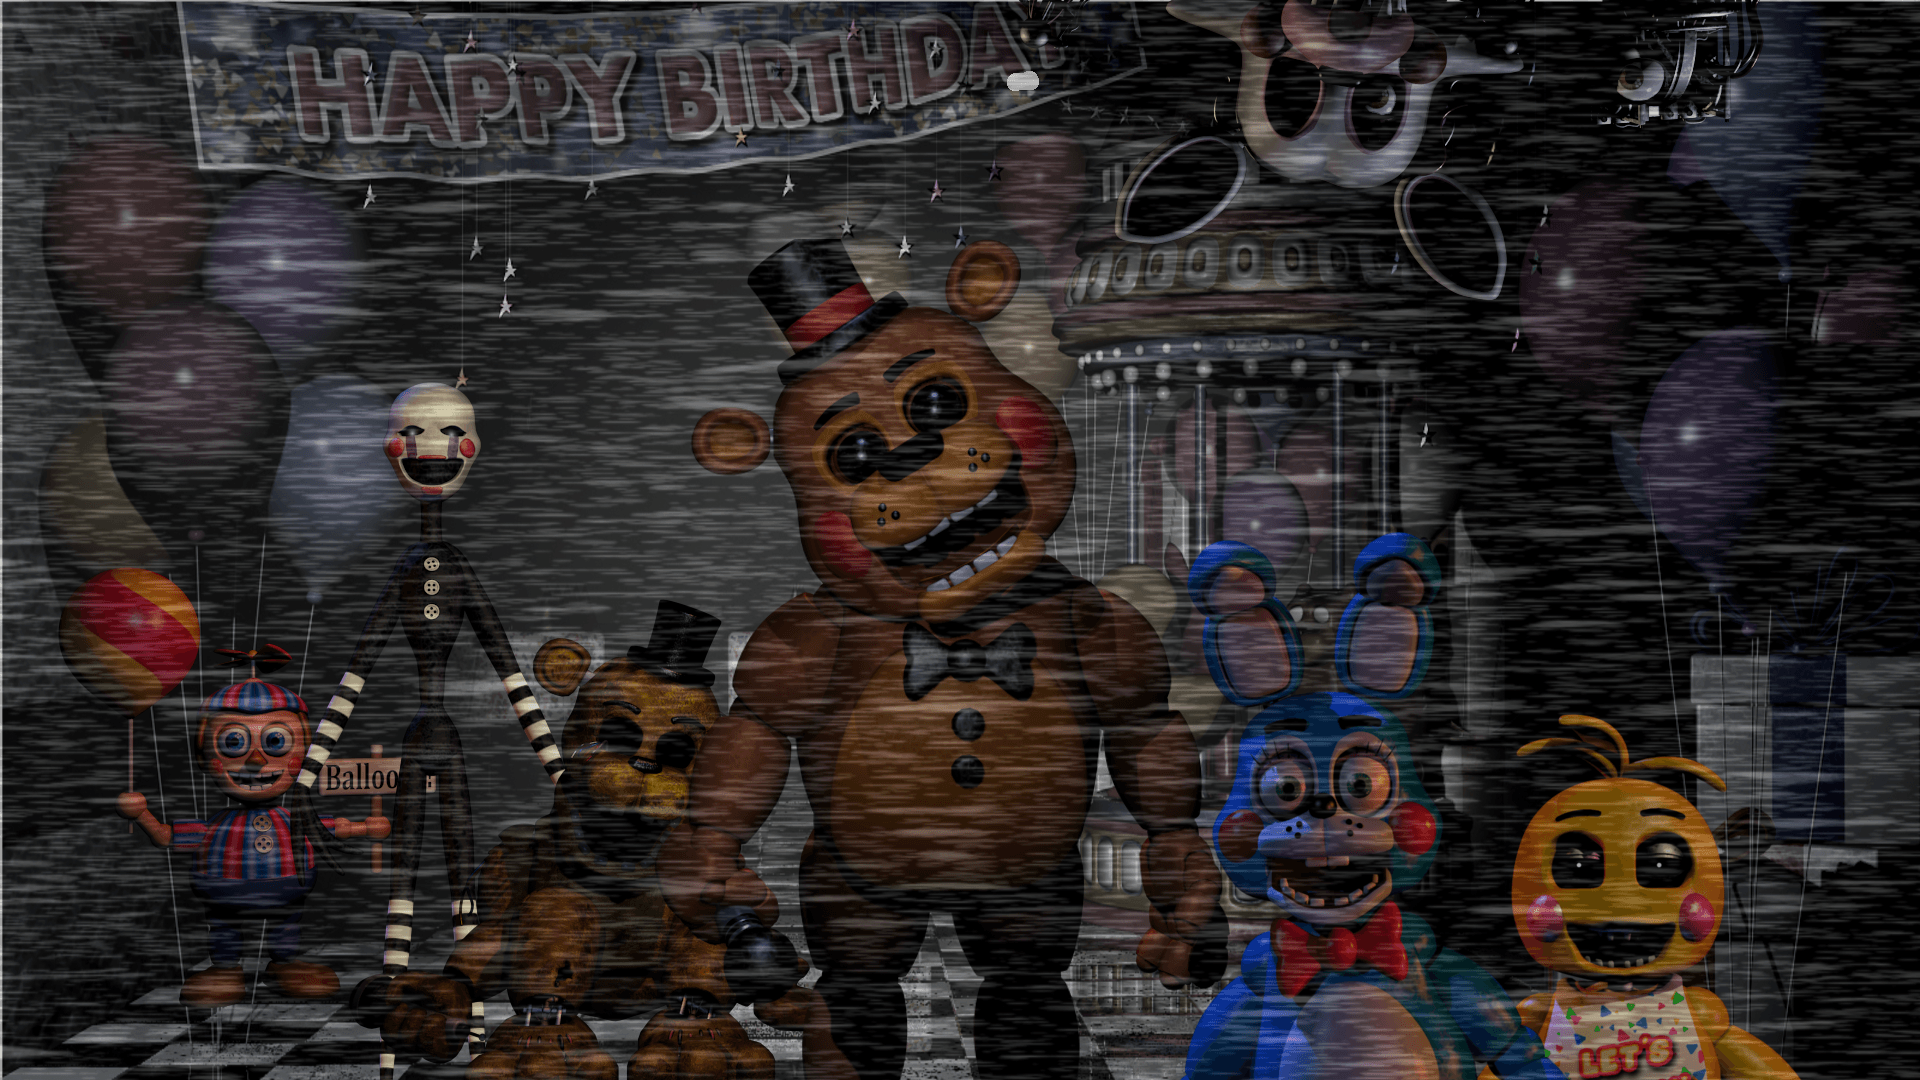 130+ Five Nights At Freddy's 2 HD Wallpapers and Backgrounds